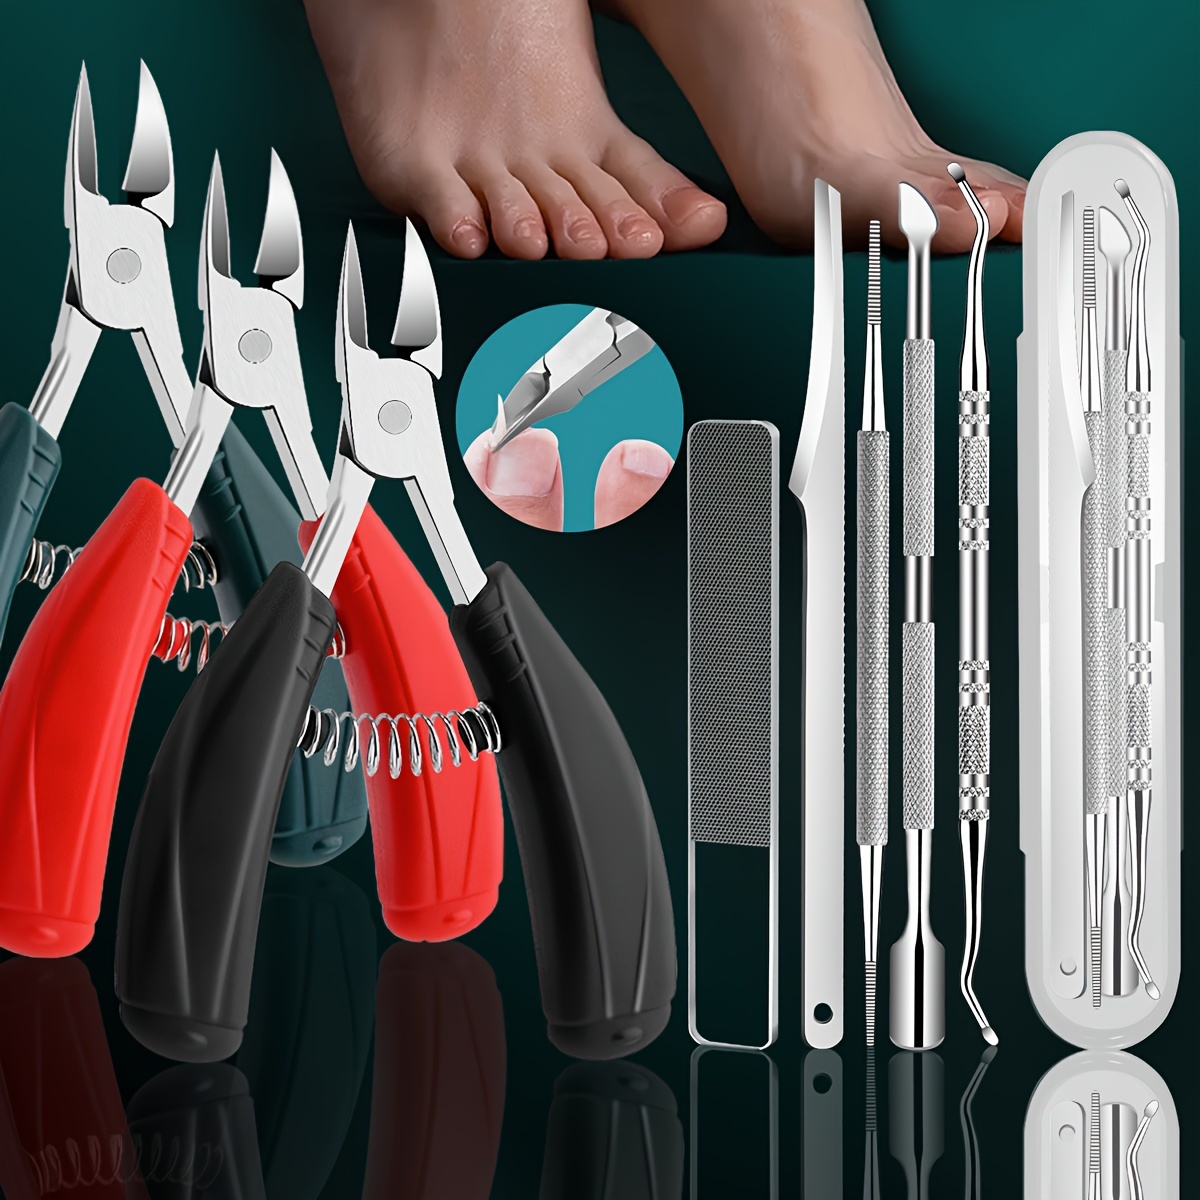 BEZOX Nail Clipper Set for Men and Women, Toenail Clippers Nail Cutter  Ingrown Toenail Tools - 6PCS Stainless Steel Nail Grooming Tools - Pedicure